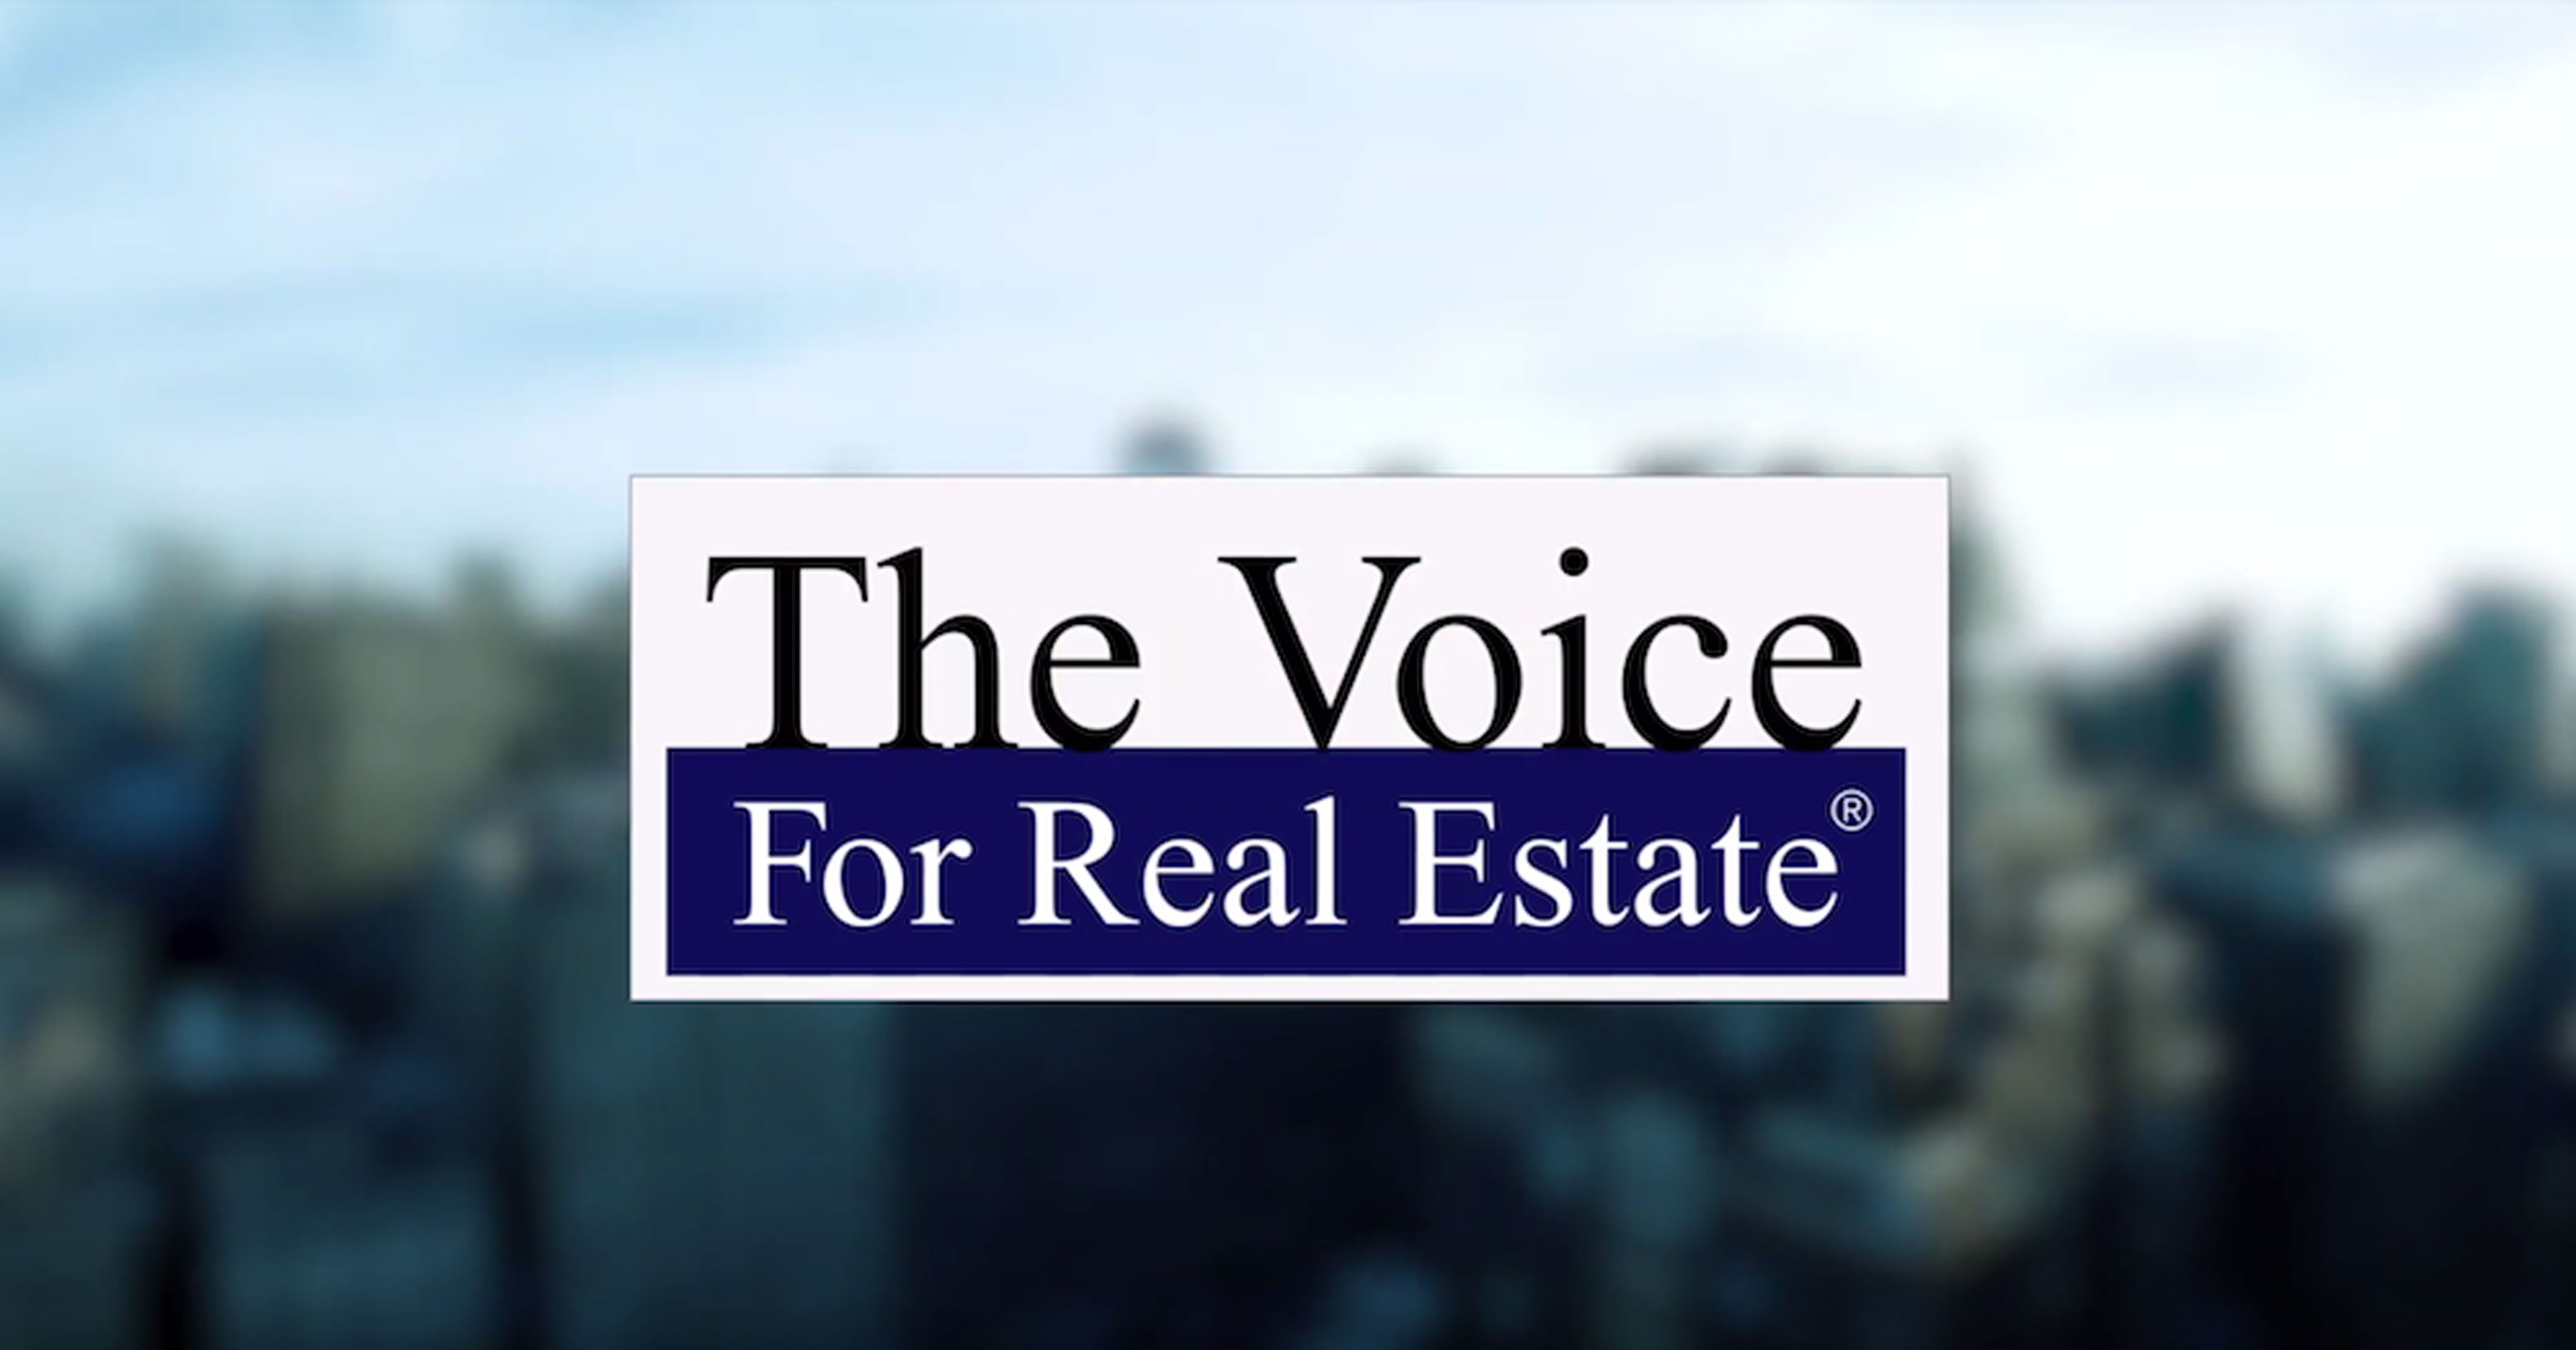 NAR: The Voice for Real Estate